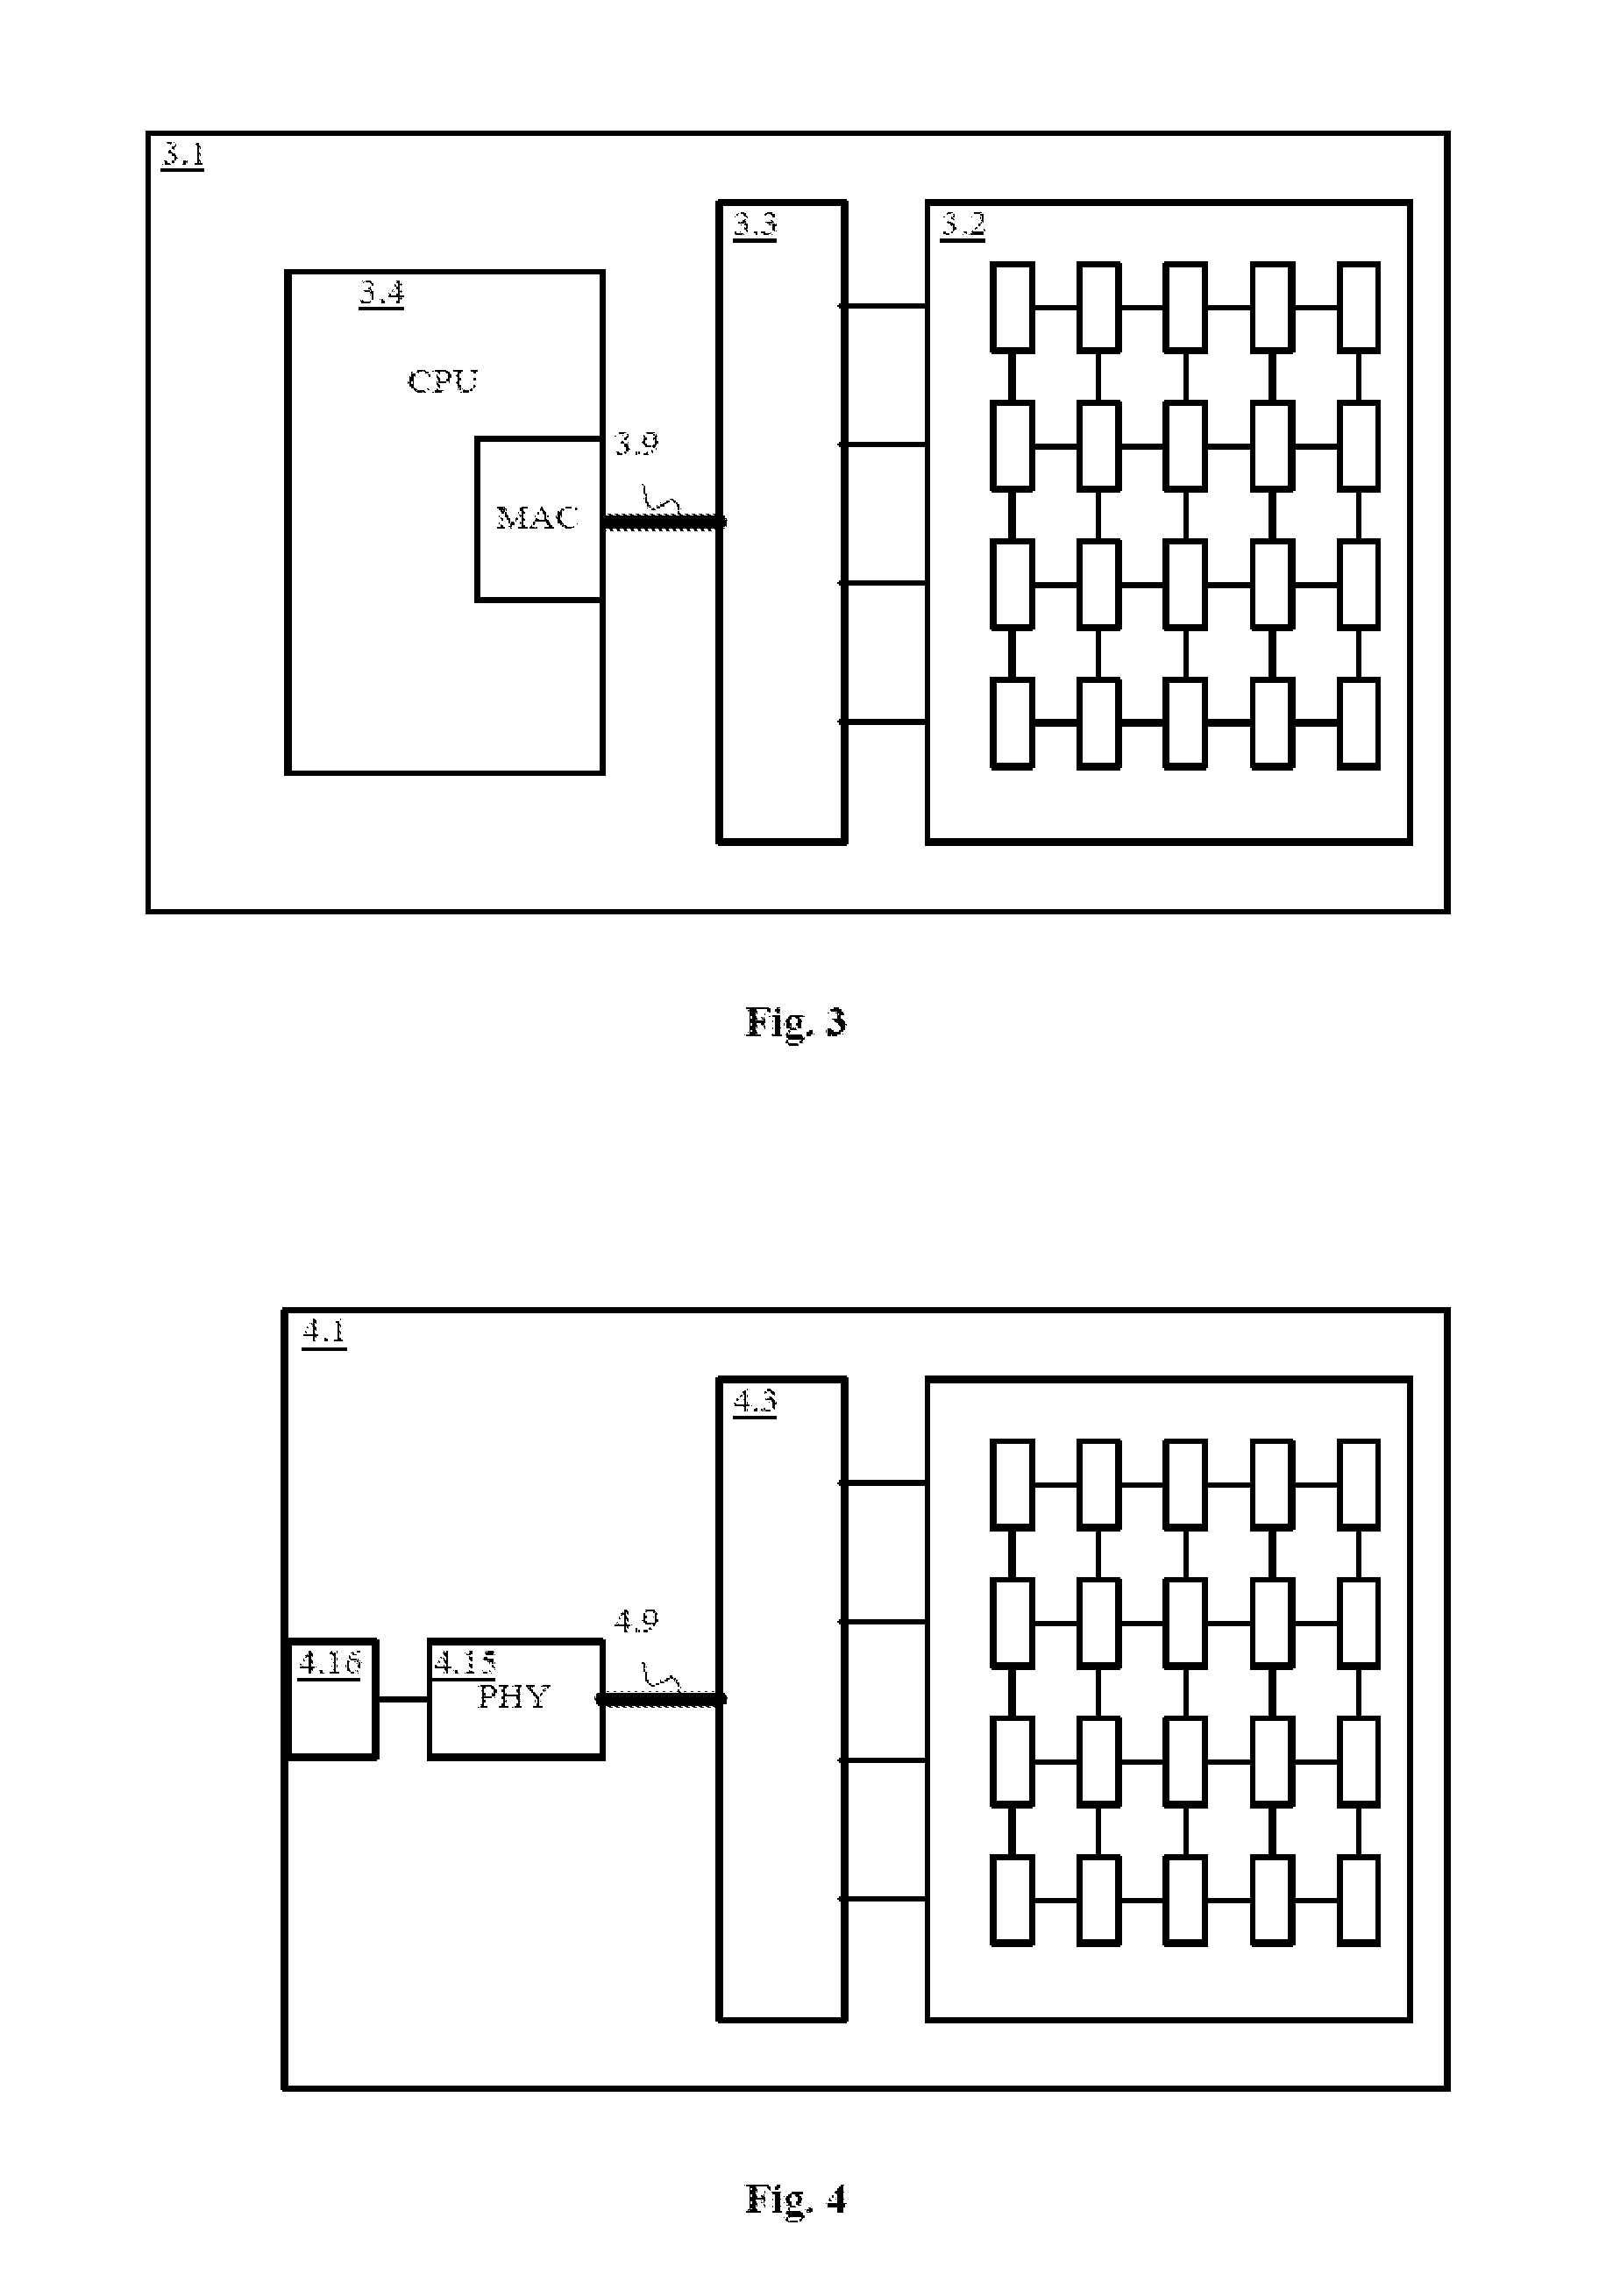 Mass memory device and storage system